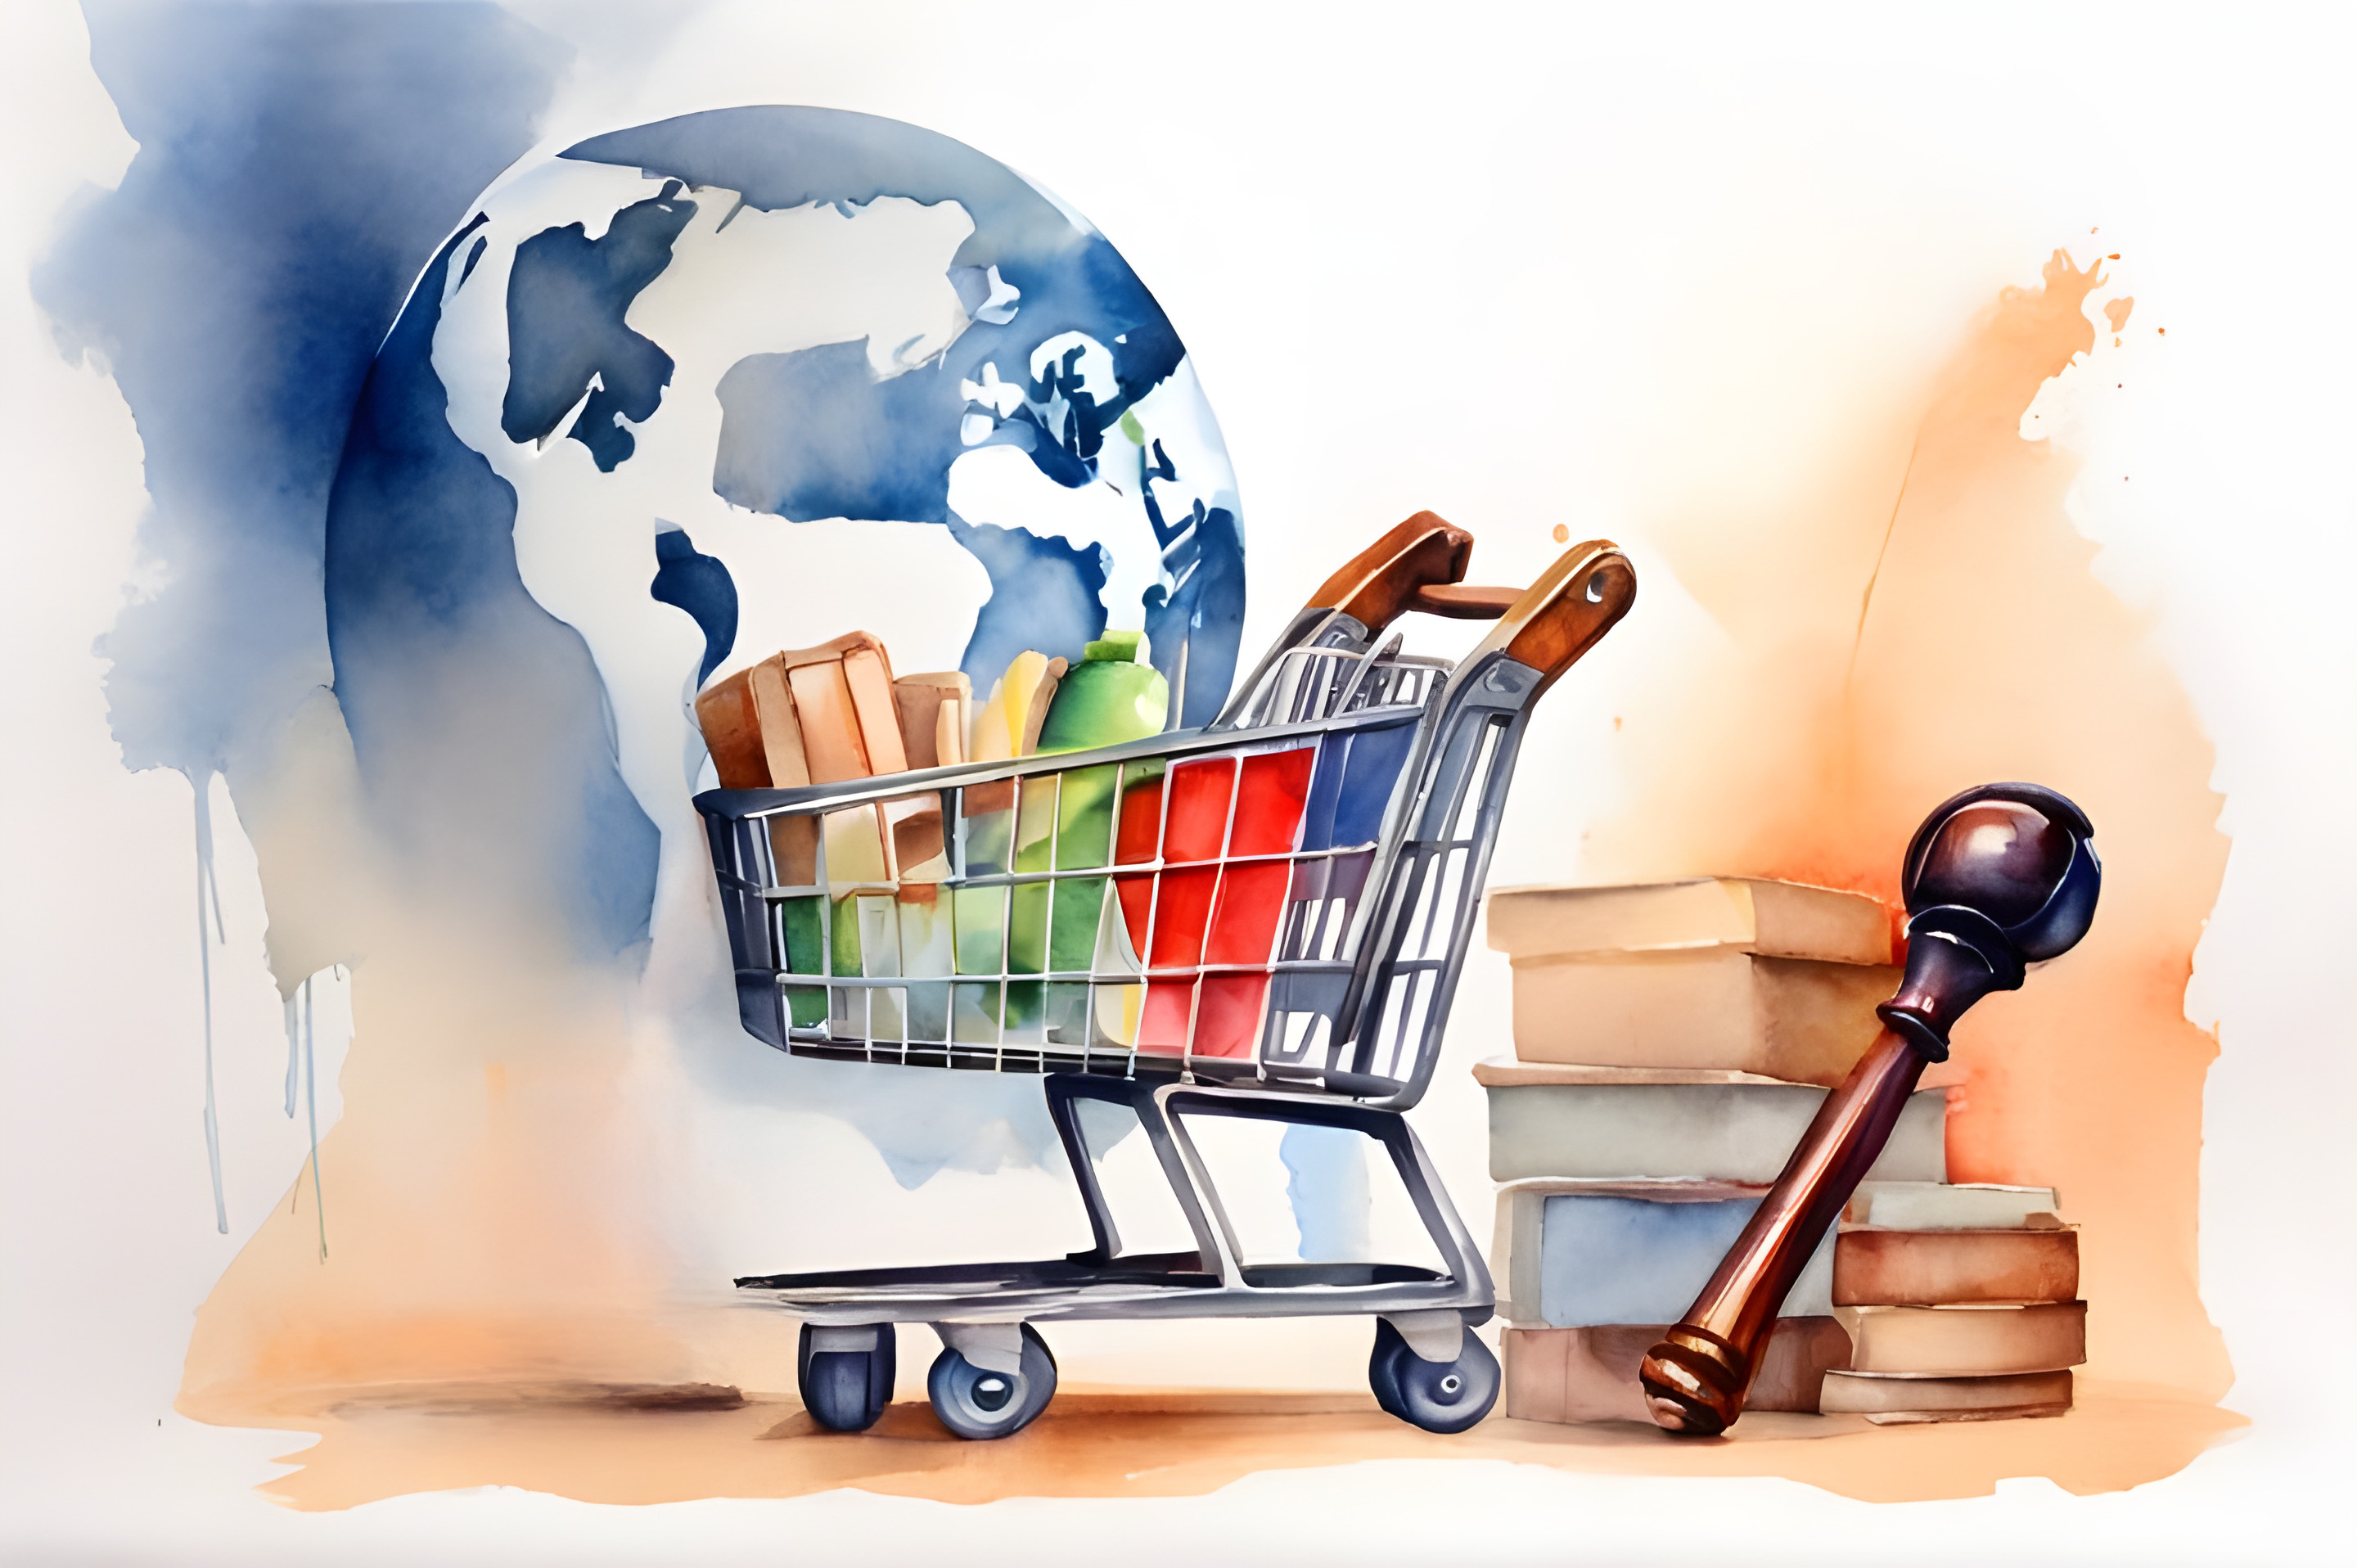 AdobeStock_708874216.jpeg (World consumer rights day march 10 Shopping cart and judge gavel for consumer rights concept. International Justice Day July 17. Legal social justice concept. Perfect for poster banner template design)